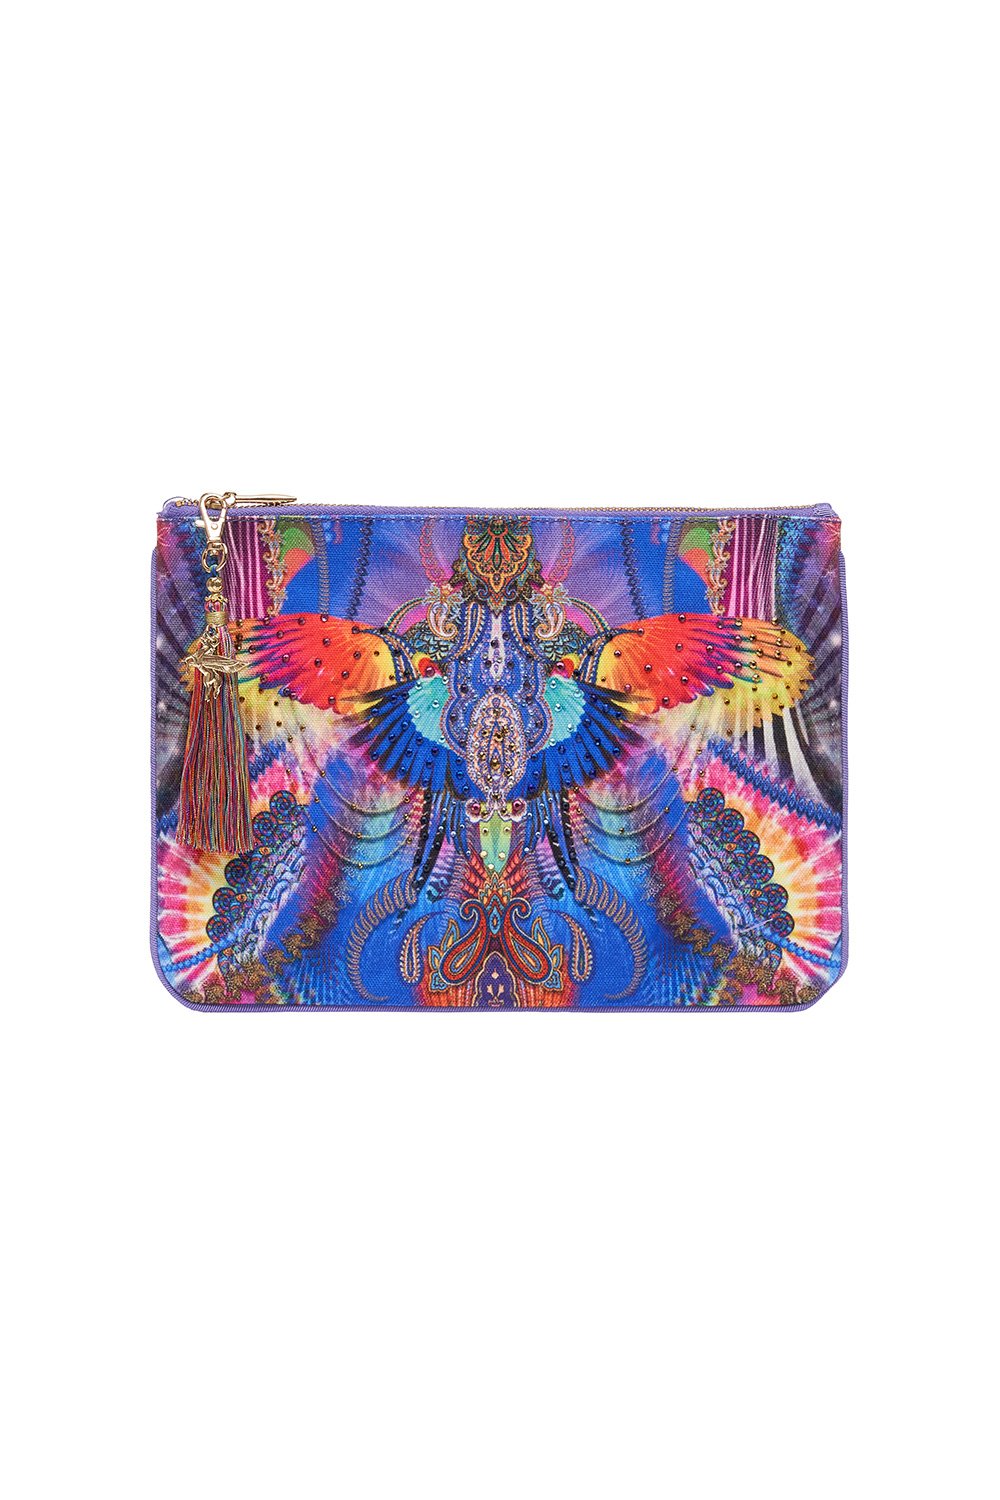 SMALL CANVAS CLUTCH PSYCHEDELICA